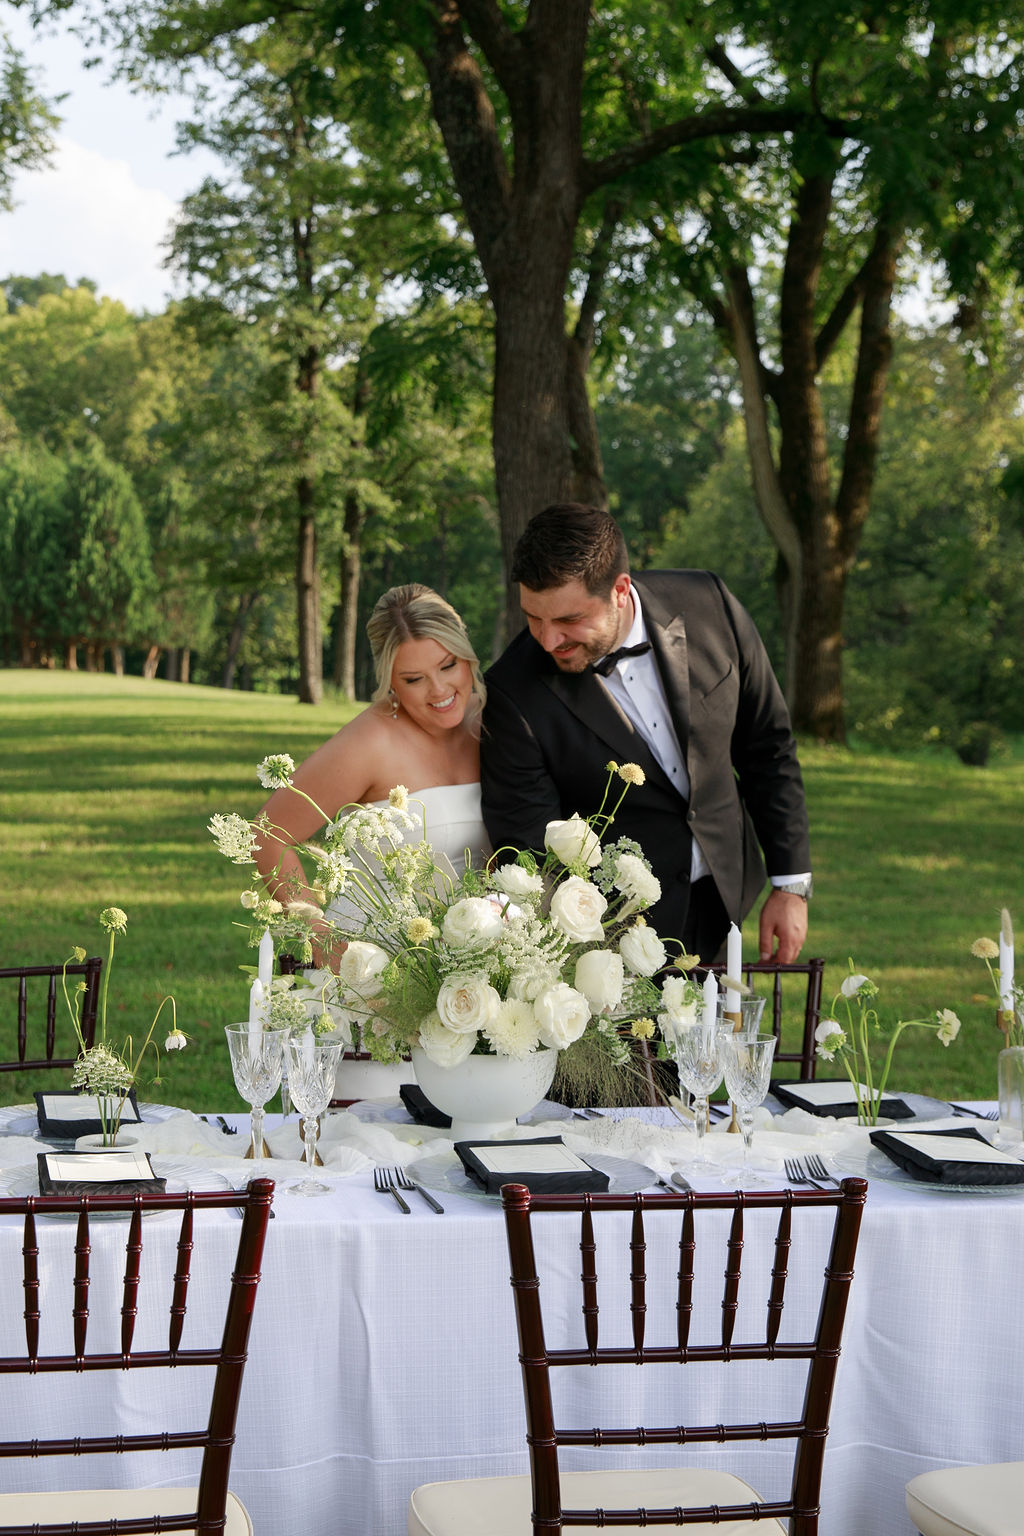 Newlyweds check out their large reception centerpiece at their outside table done by a washington dc wedding florist